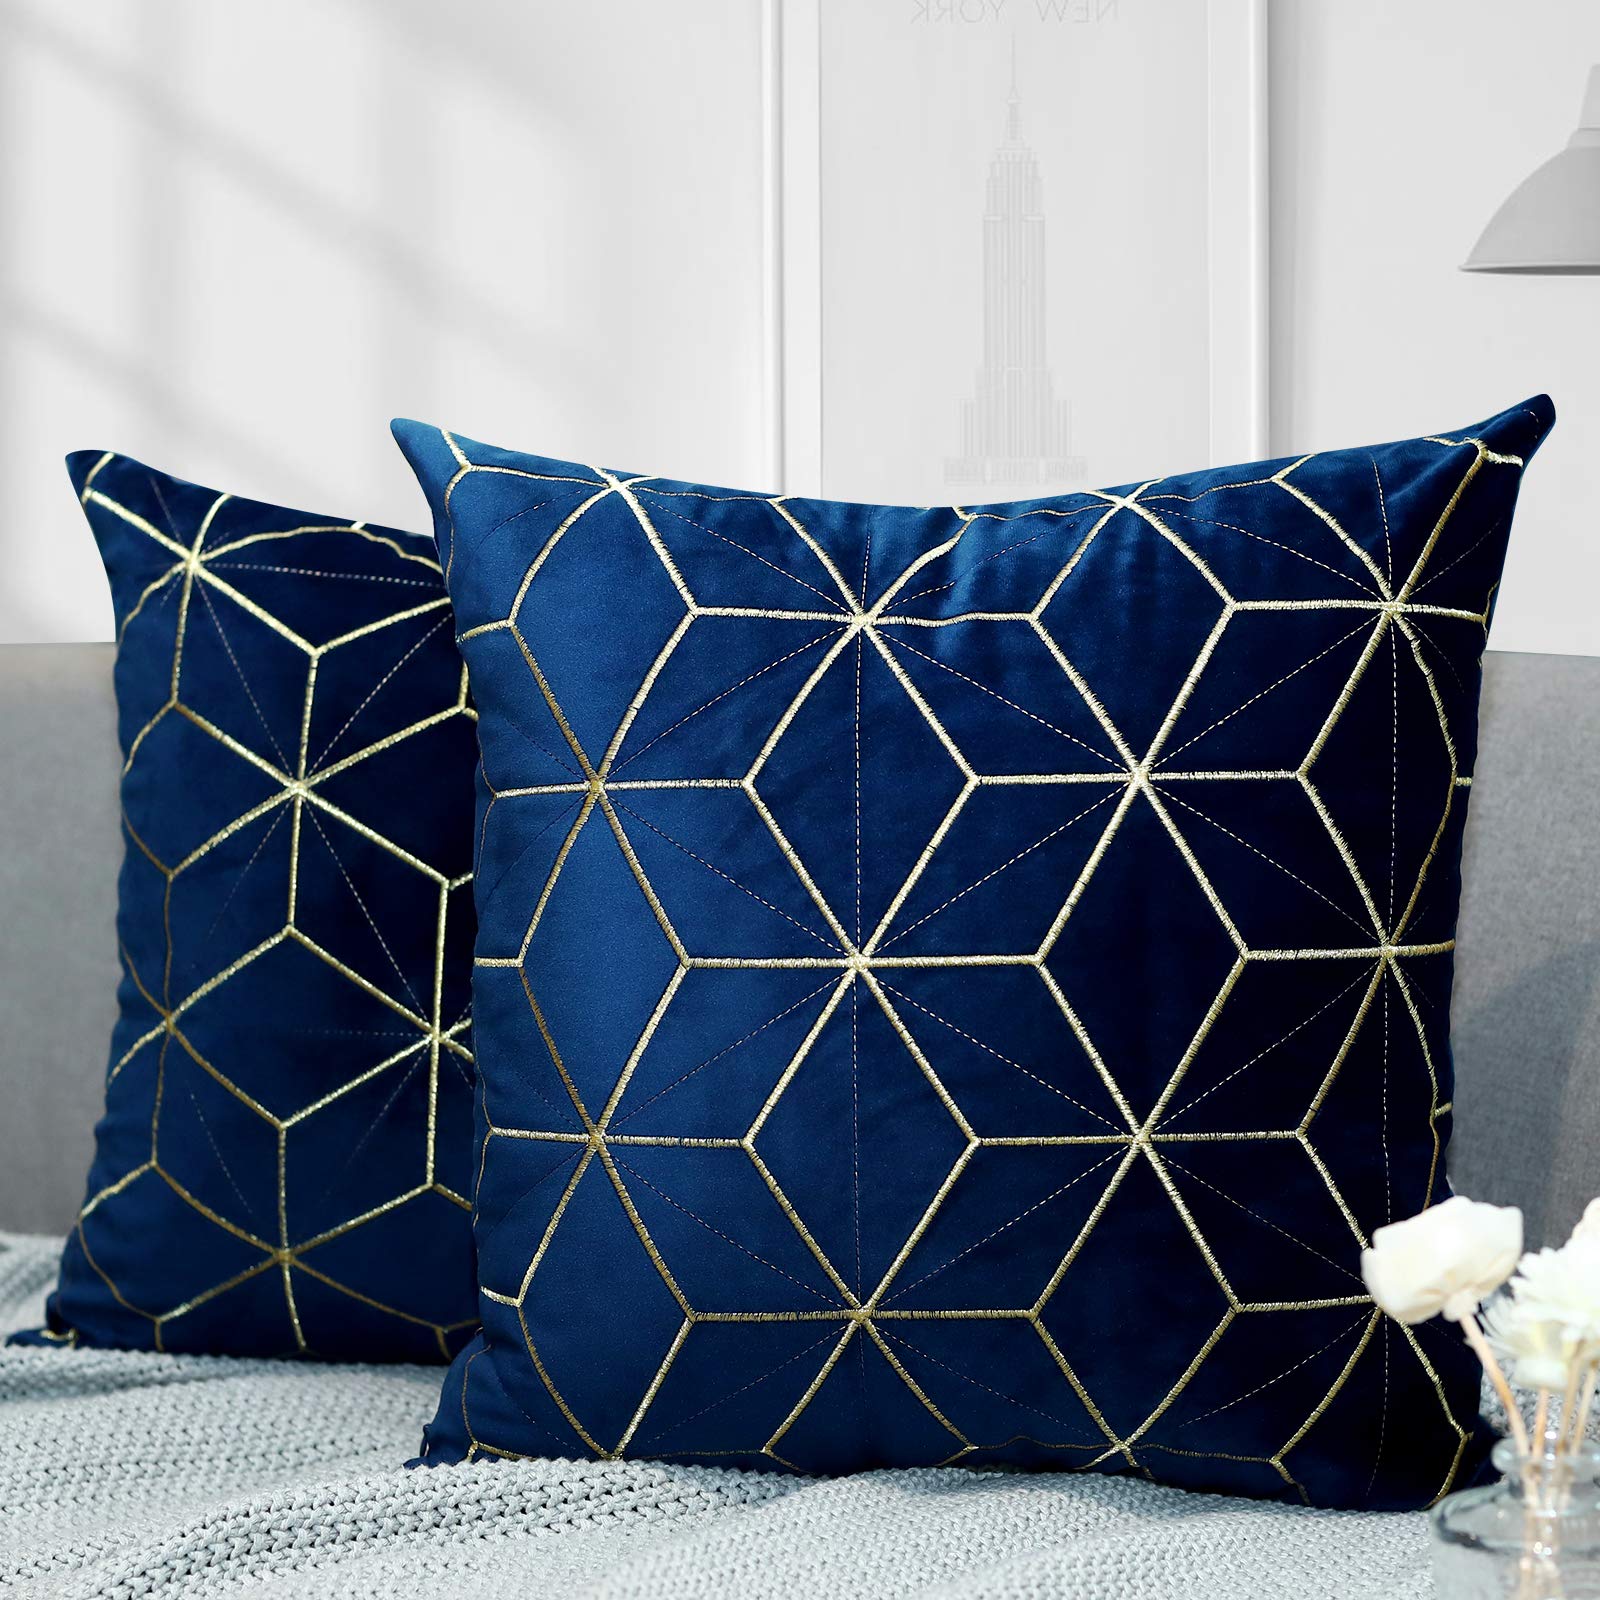 Lewondr Golden Embroidery Velvet Throw Pillow Cover, 2 Pack Soft Velvet Throw Pillow Case Golden Lines Embroidered Rhombus Pattern Back Cushion Cover for Car Sofa Bed 18"x18"(45x45cm), Navy Blue